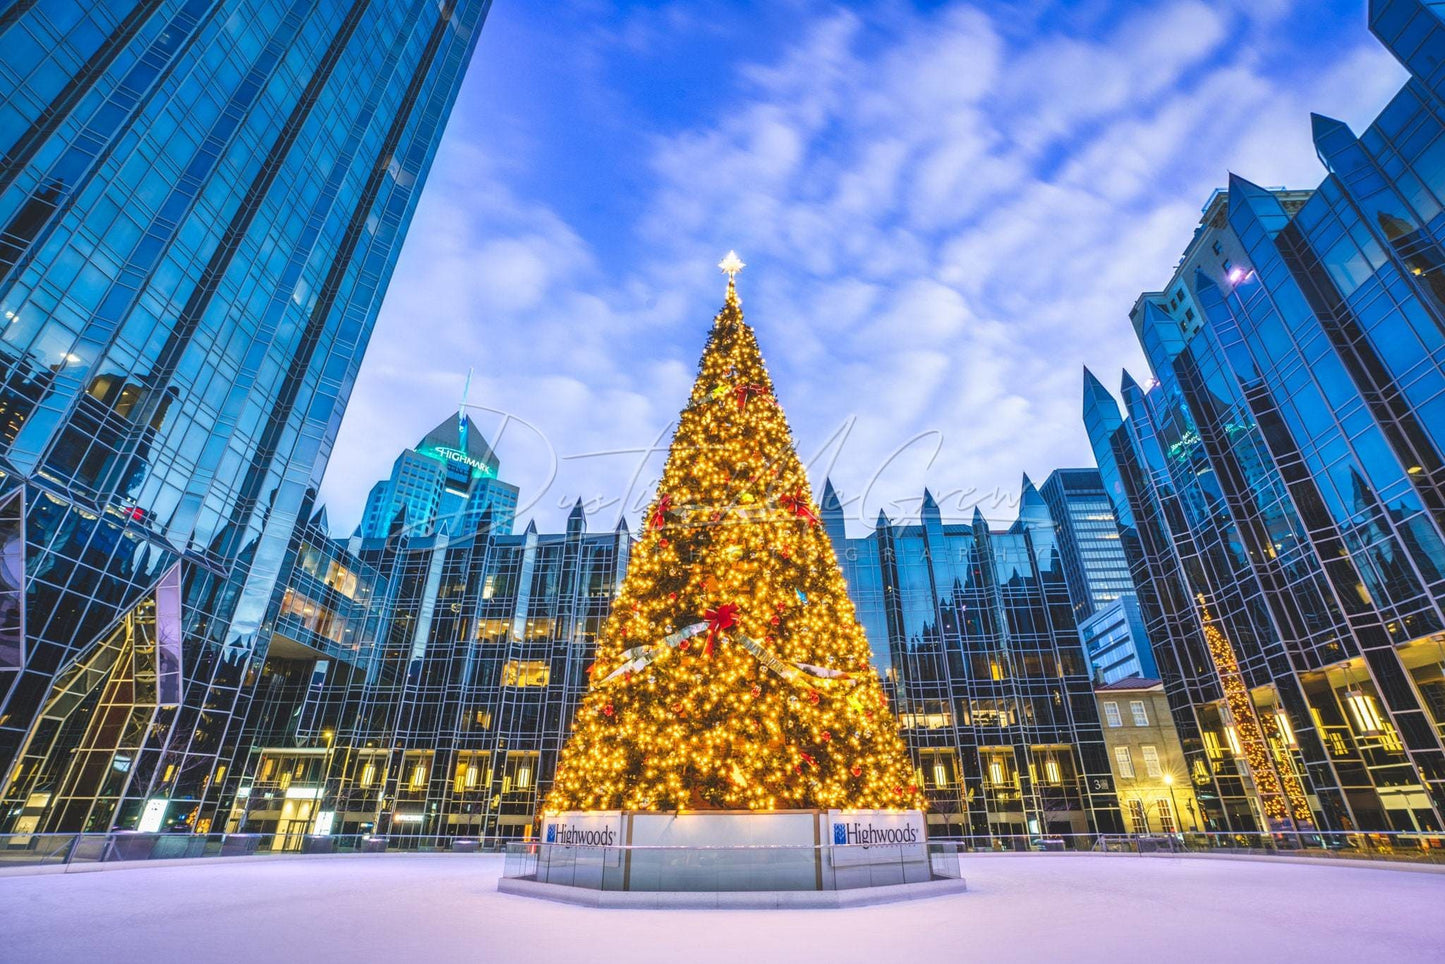 Pittsburgh Photo - The Ppg Place Christmas Tree Art